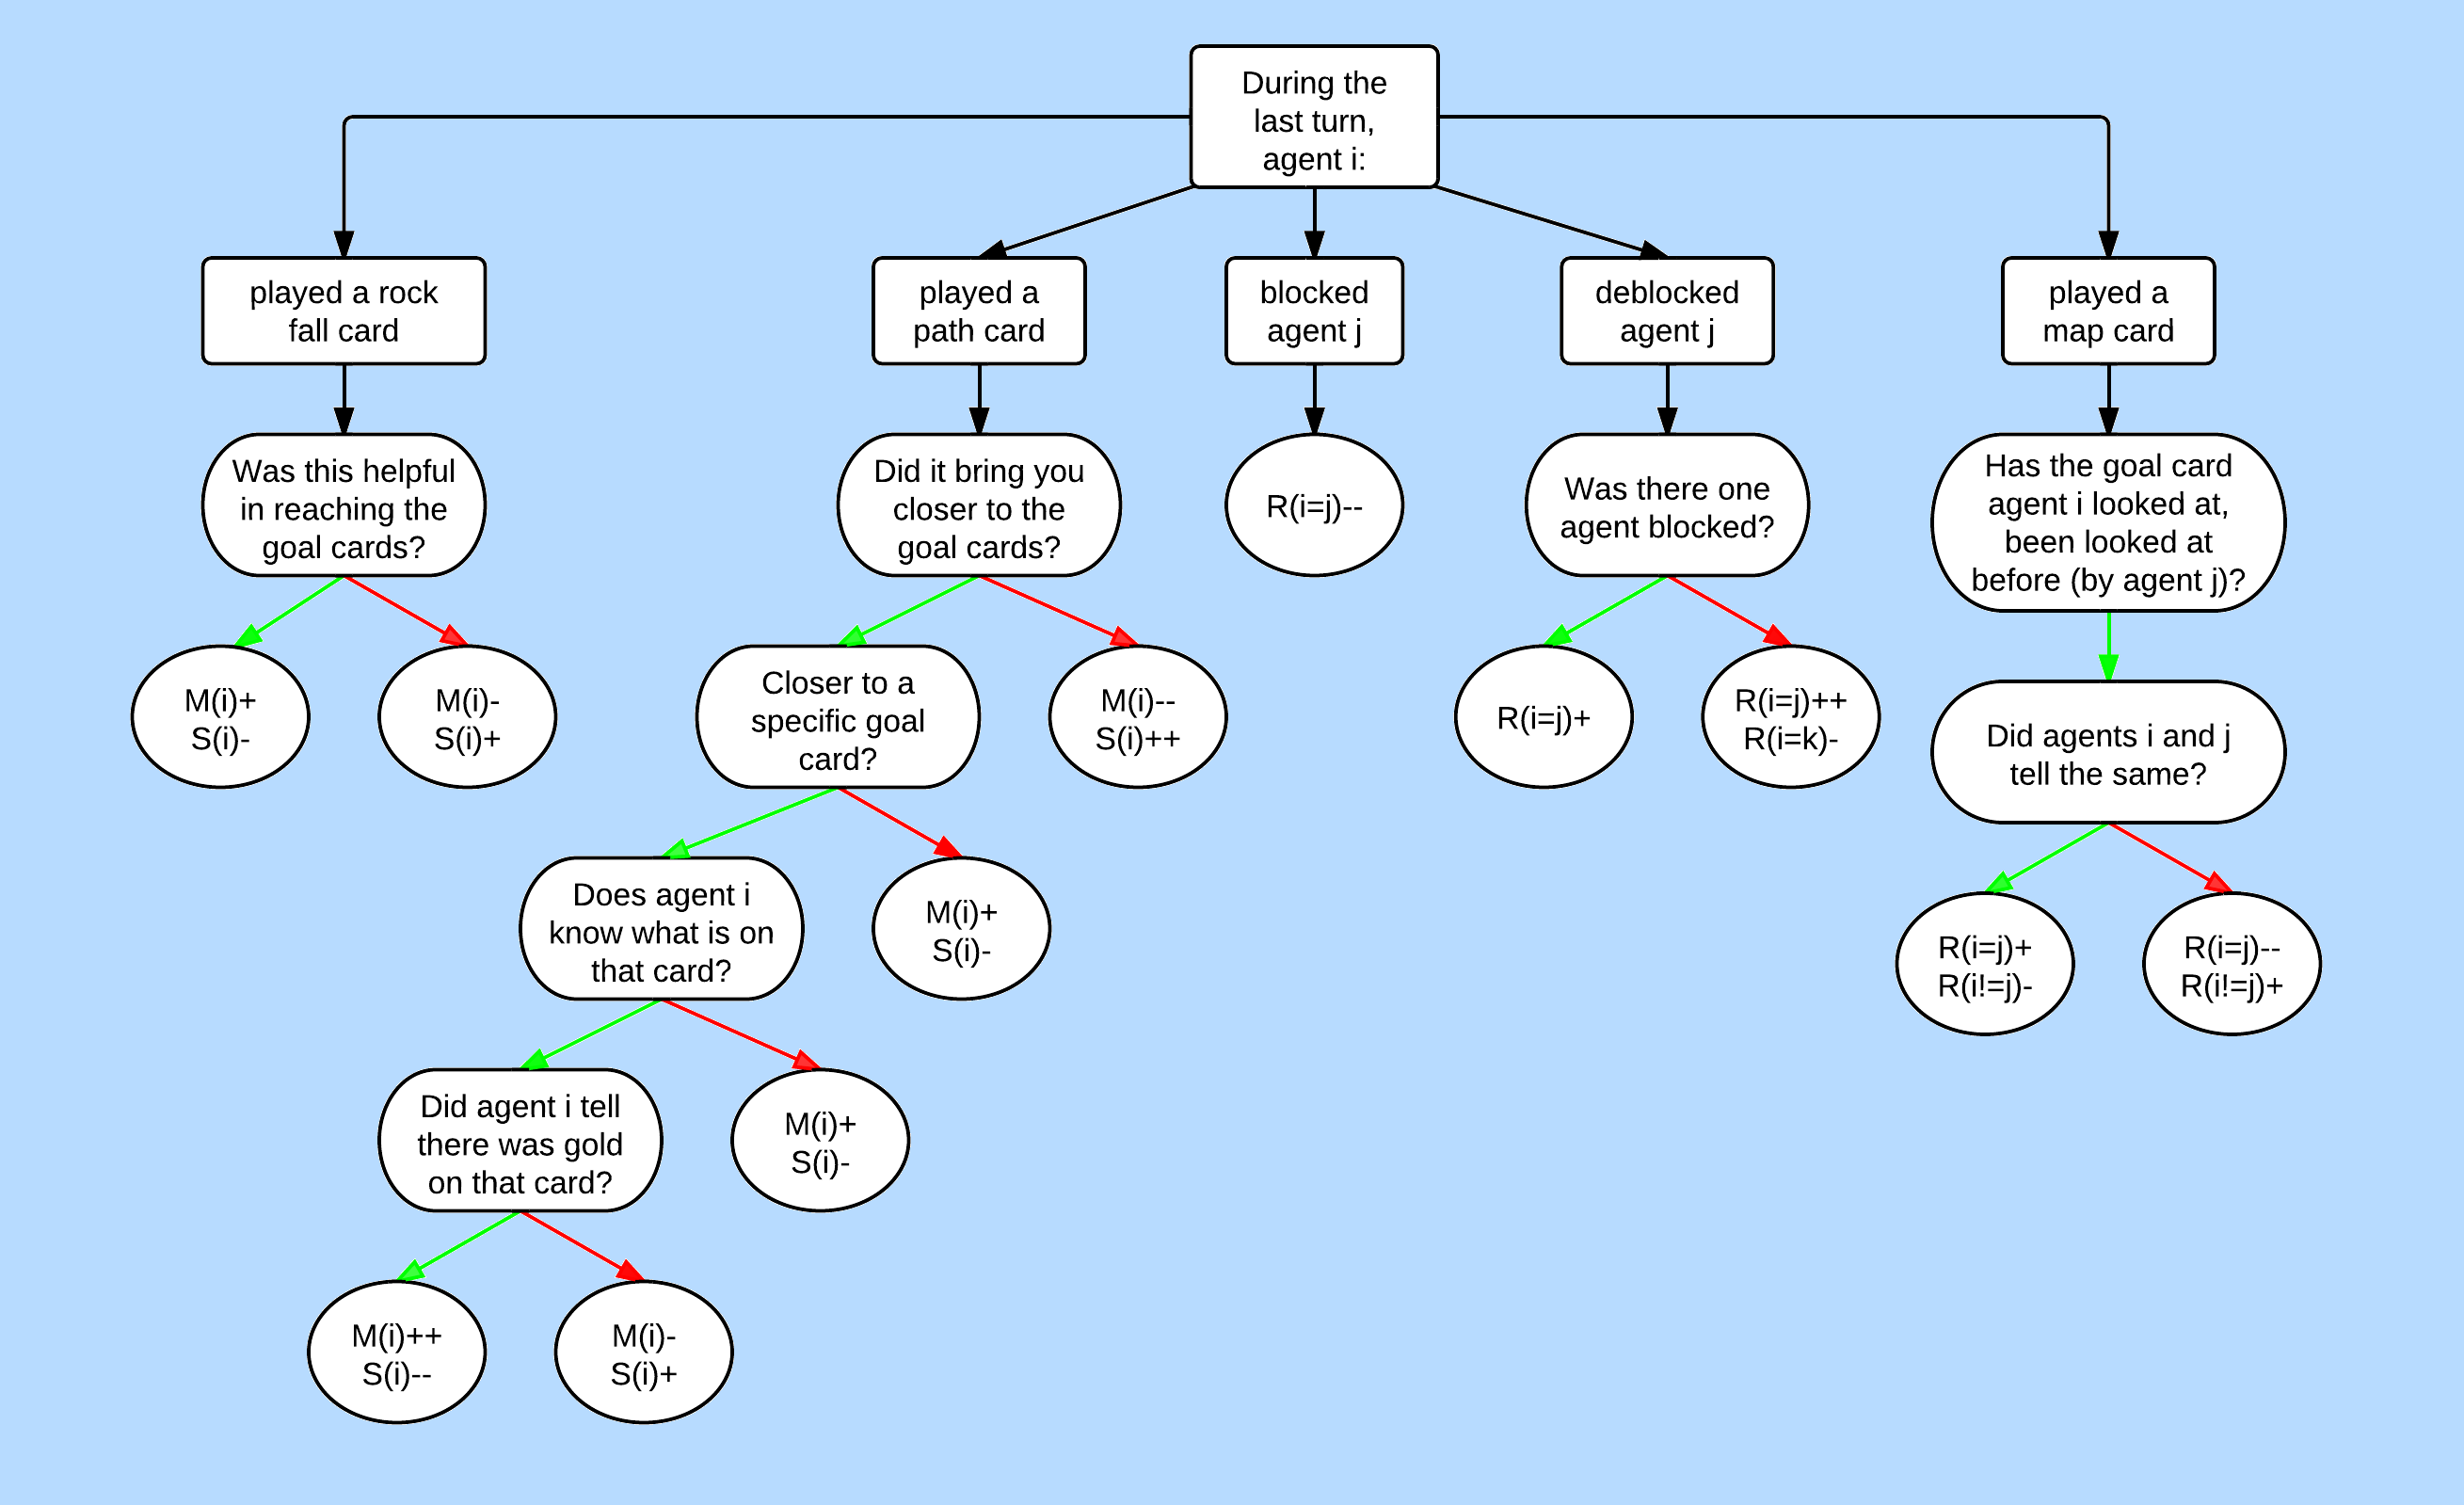 This flow chart shows how to update the Kripke model after each turn.